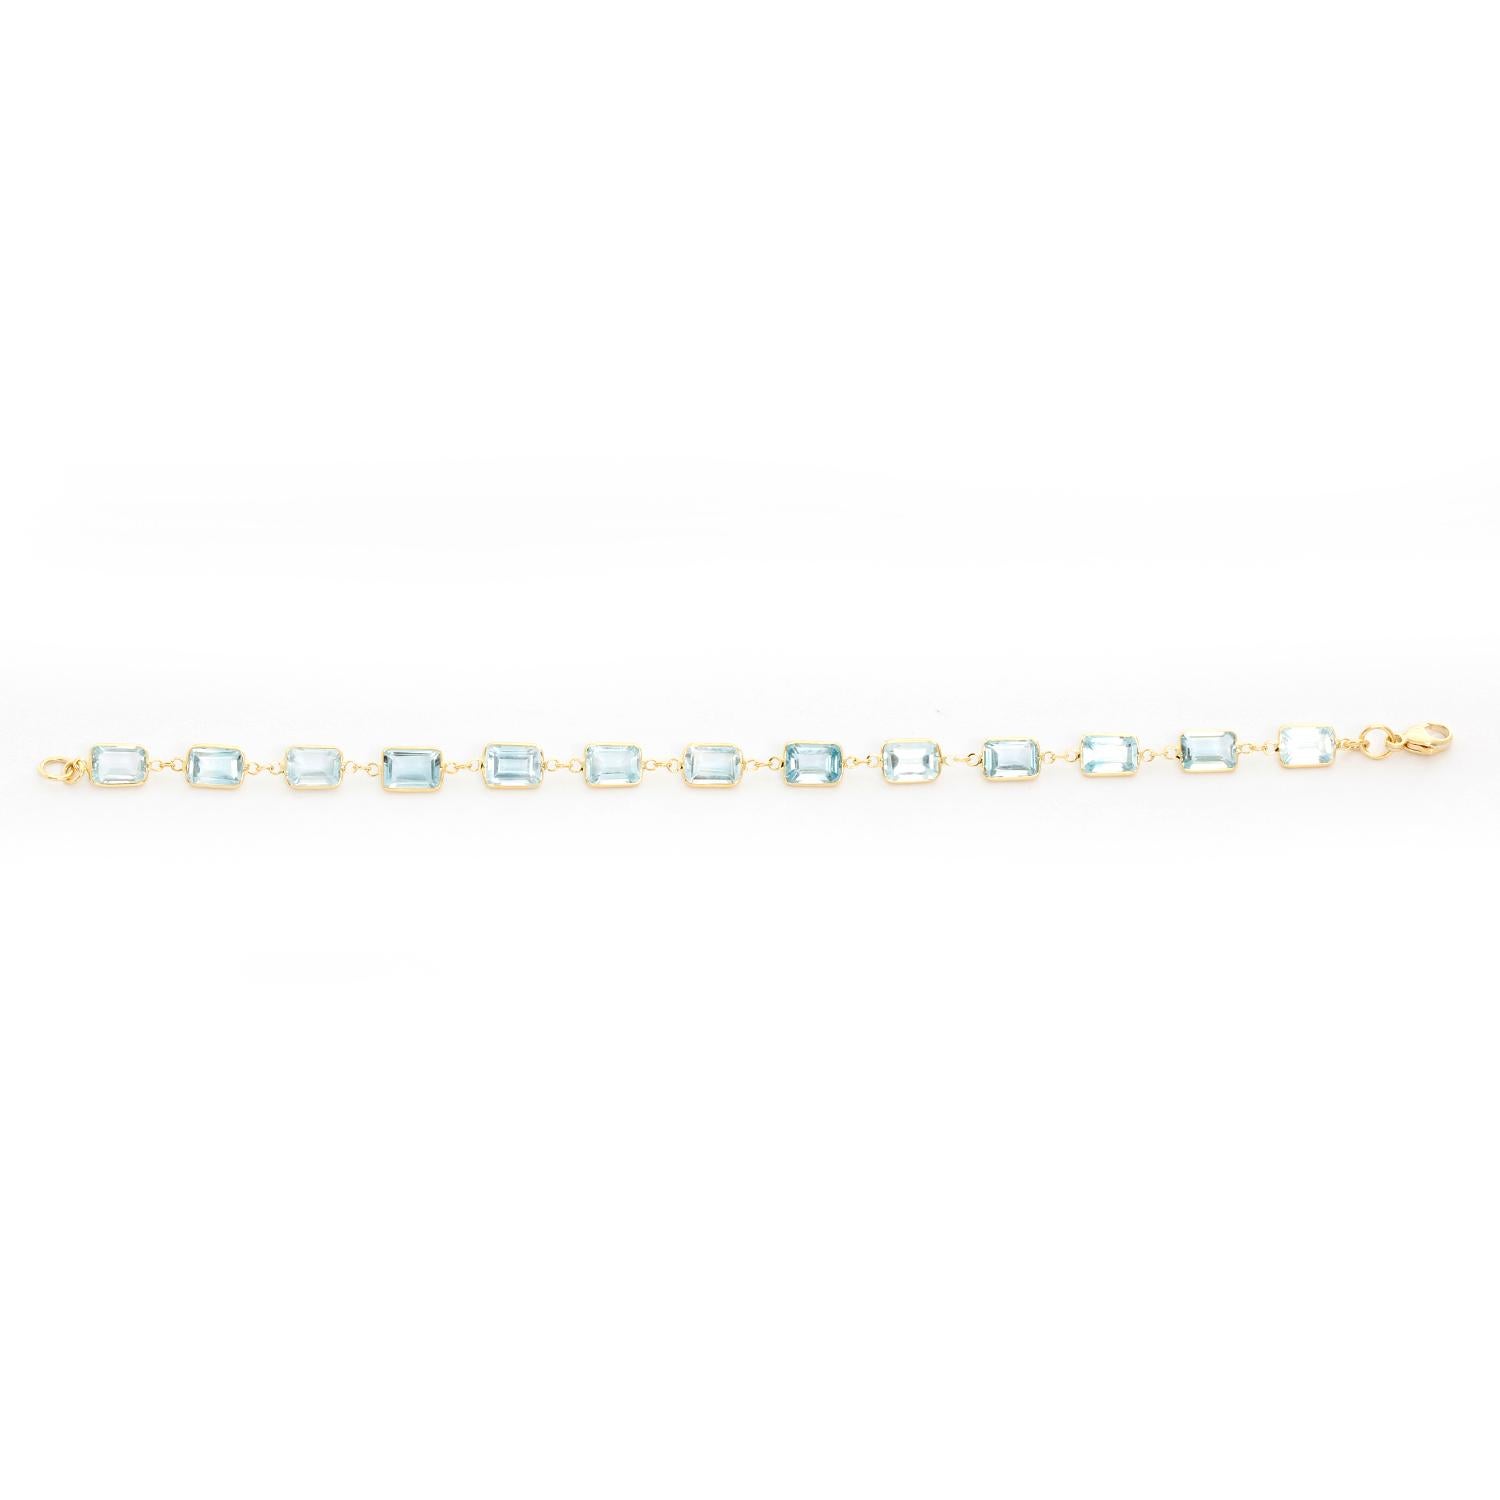 18K Yellow Gold Blue Topaz Bracelet - 13 gorgeous light blue topaz baguettes are housed on an 18k yellow gold bracelet and separated by 3 round links. Bracelet measures 6 3/4 inches. New with DeMesy box. .